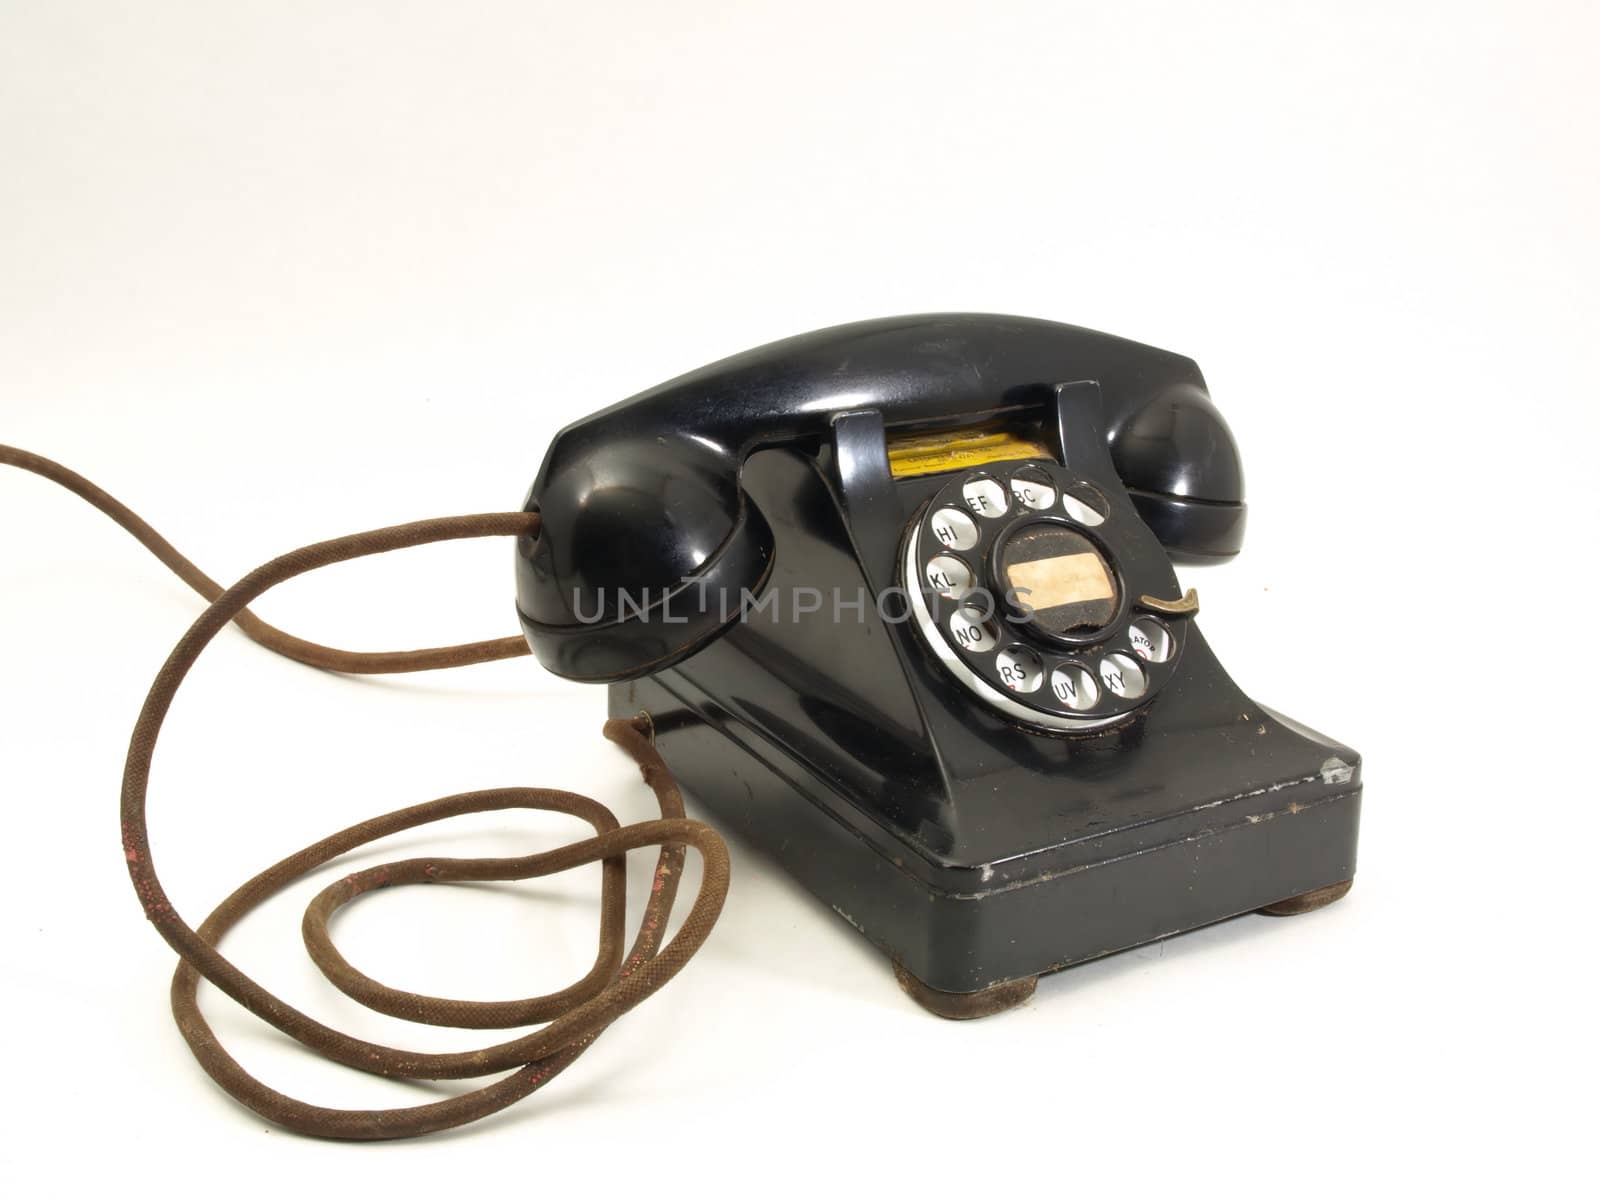 An antique black rotary dial telephone isolated against a white background.